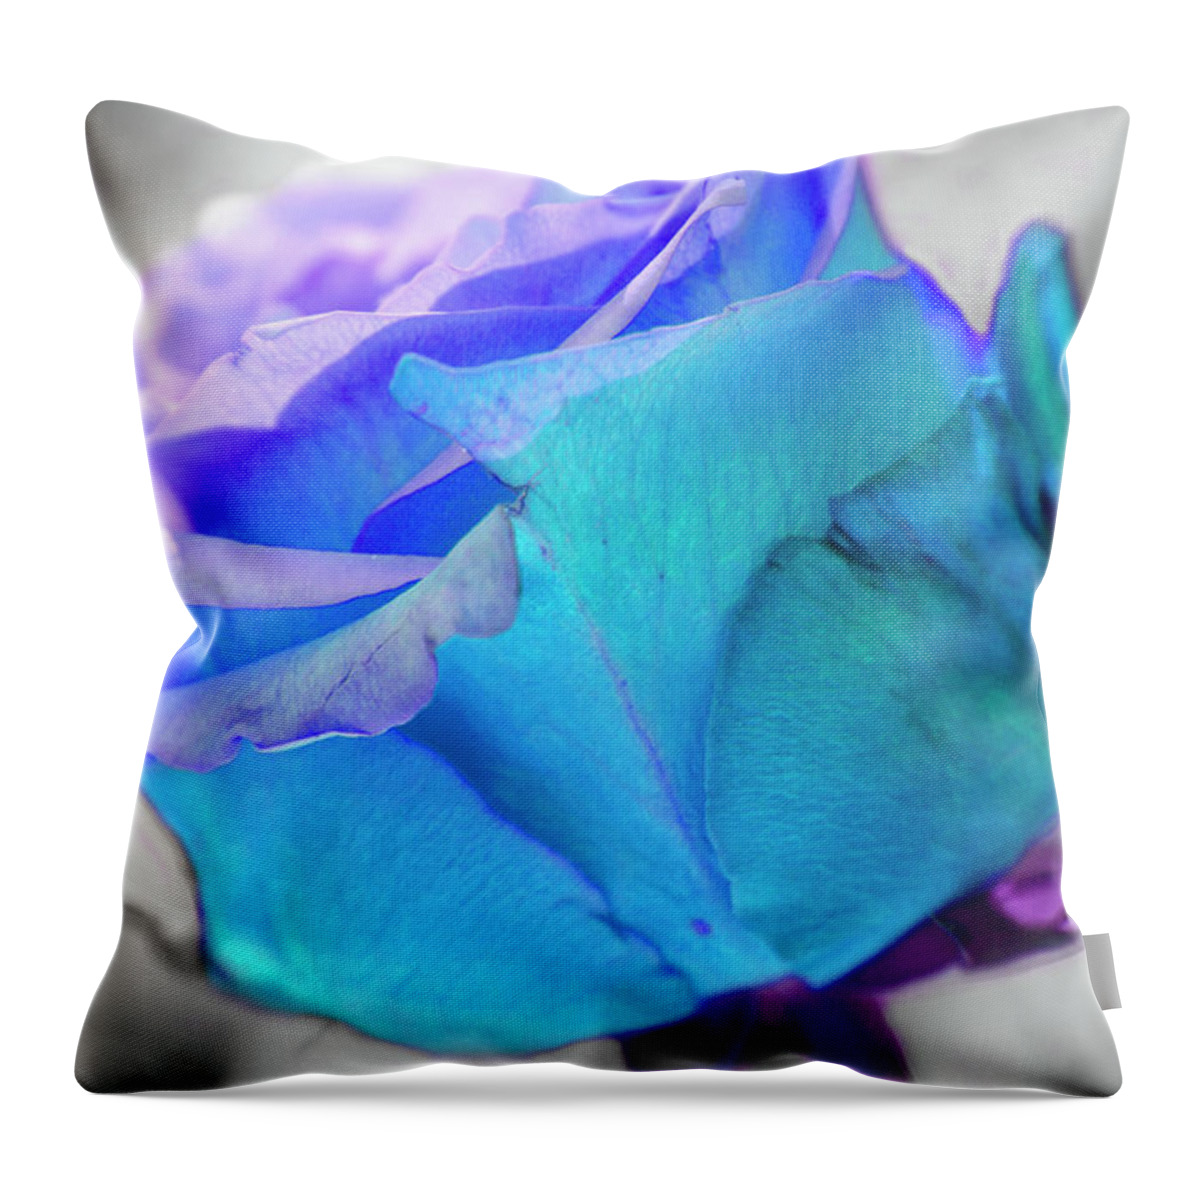 Floral Throw Pillow featuring the photograph Blue Rose by Renee Spade Photography